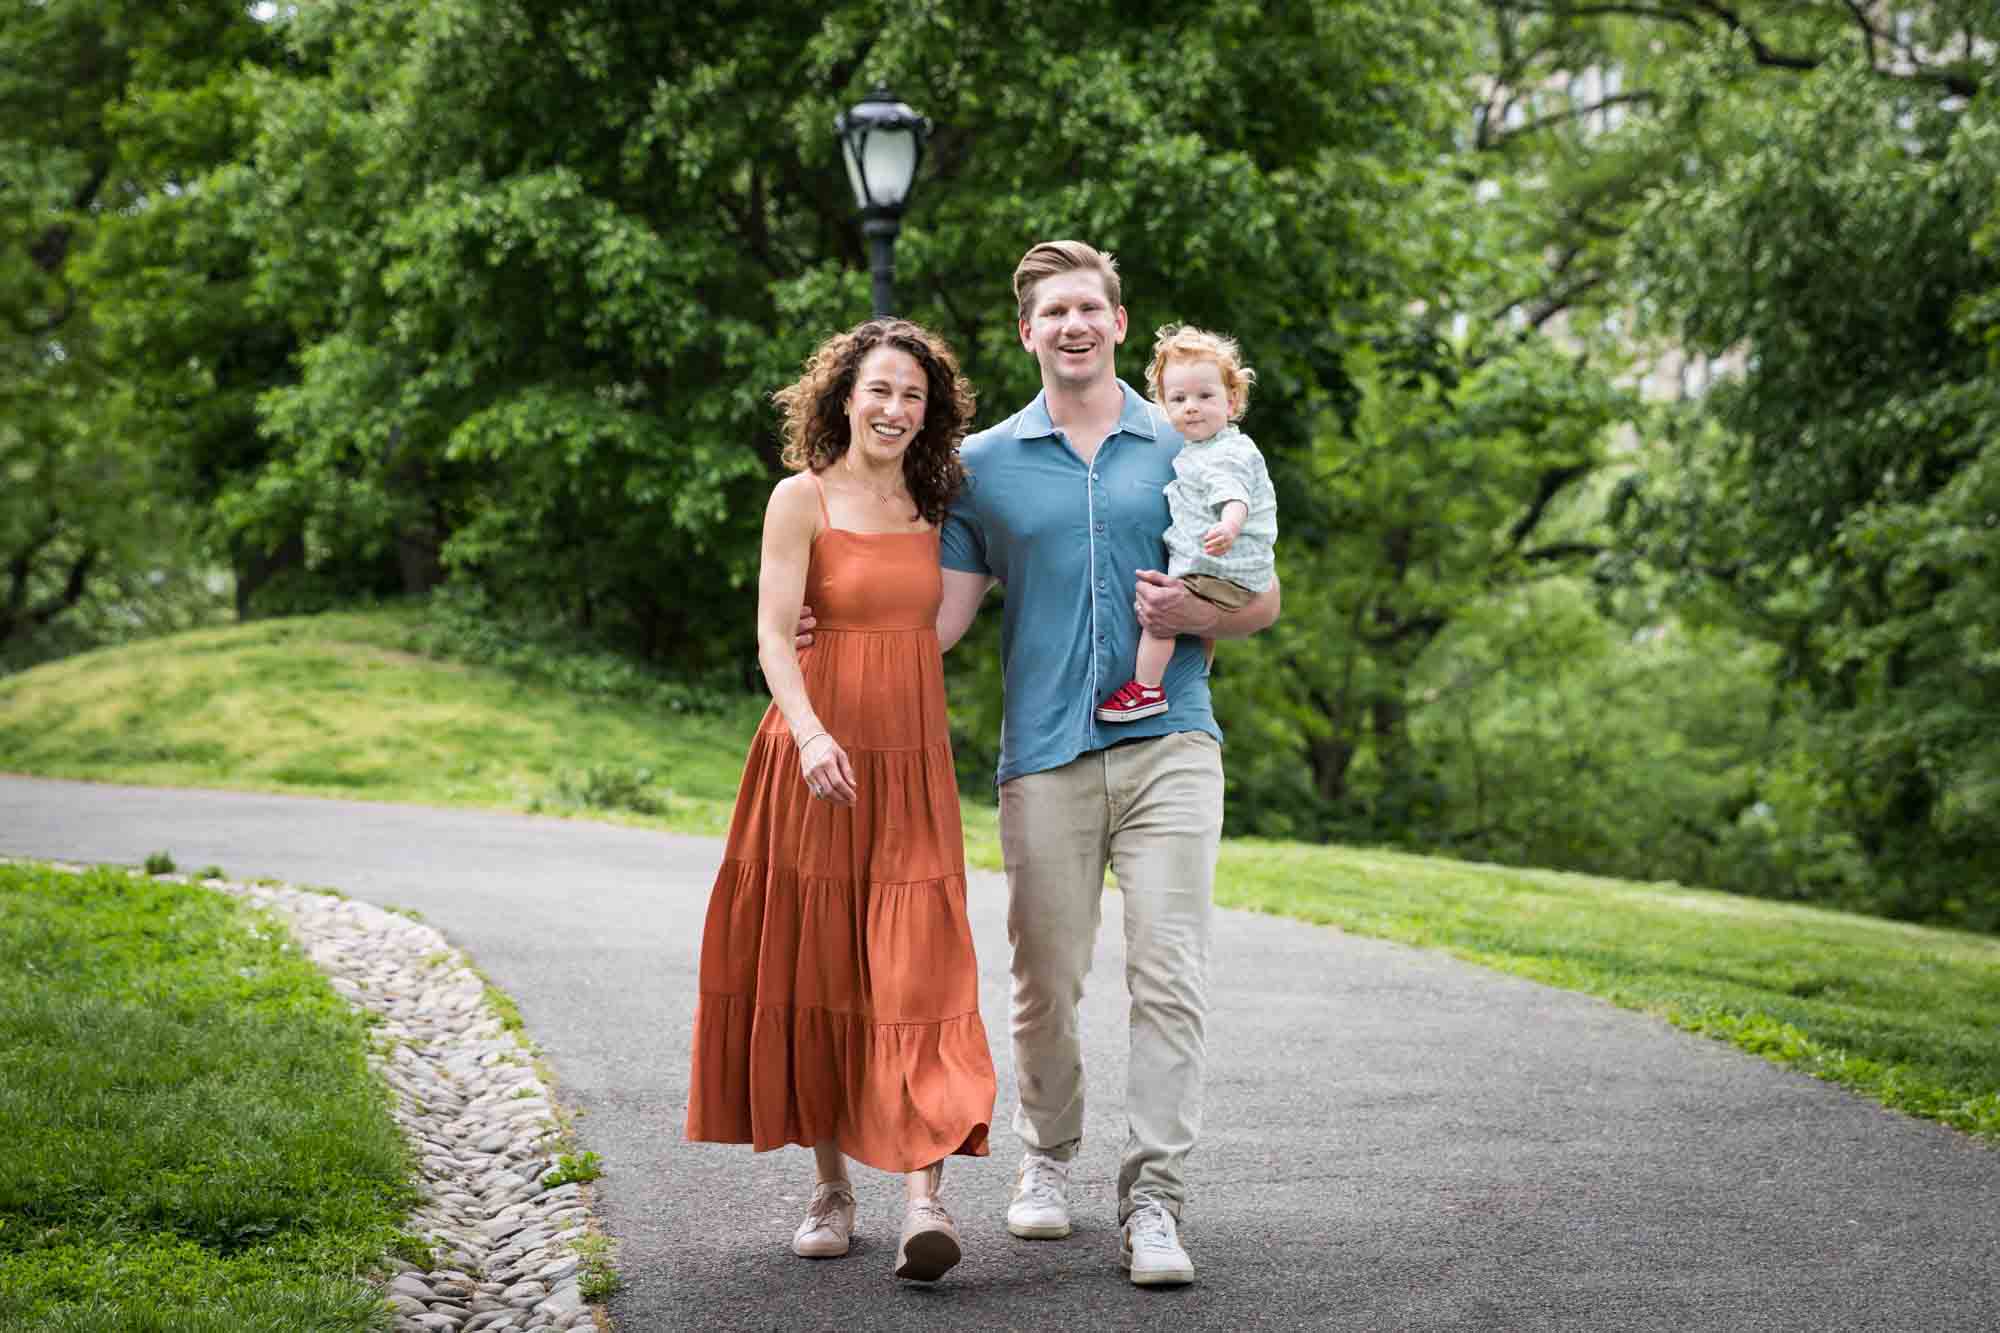 Mother and father holding red-haired little boy walking up pathway in front of trees during a Central Park family portrait session